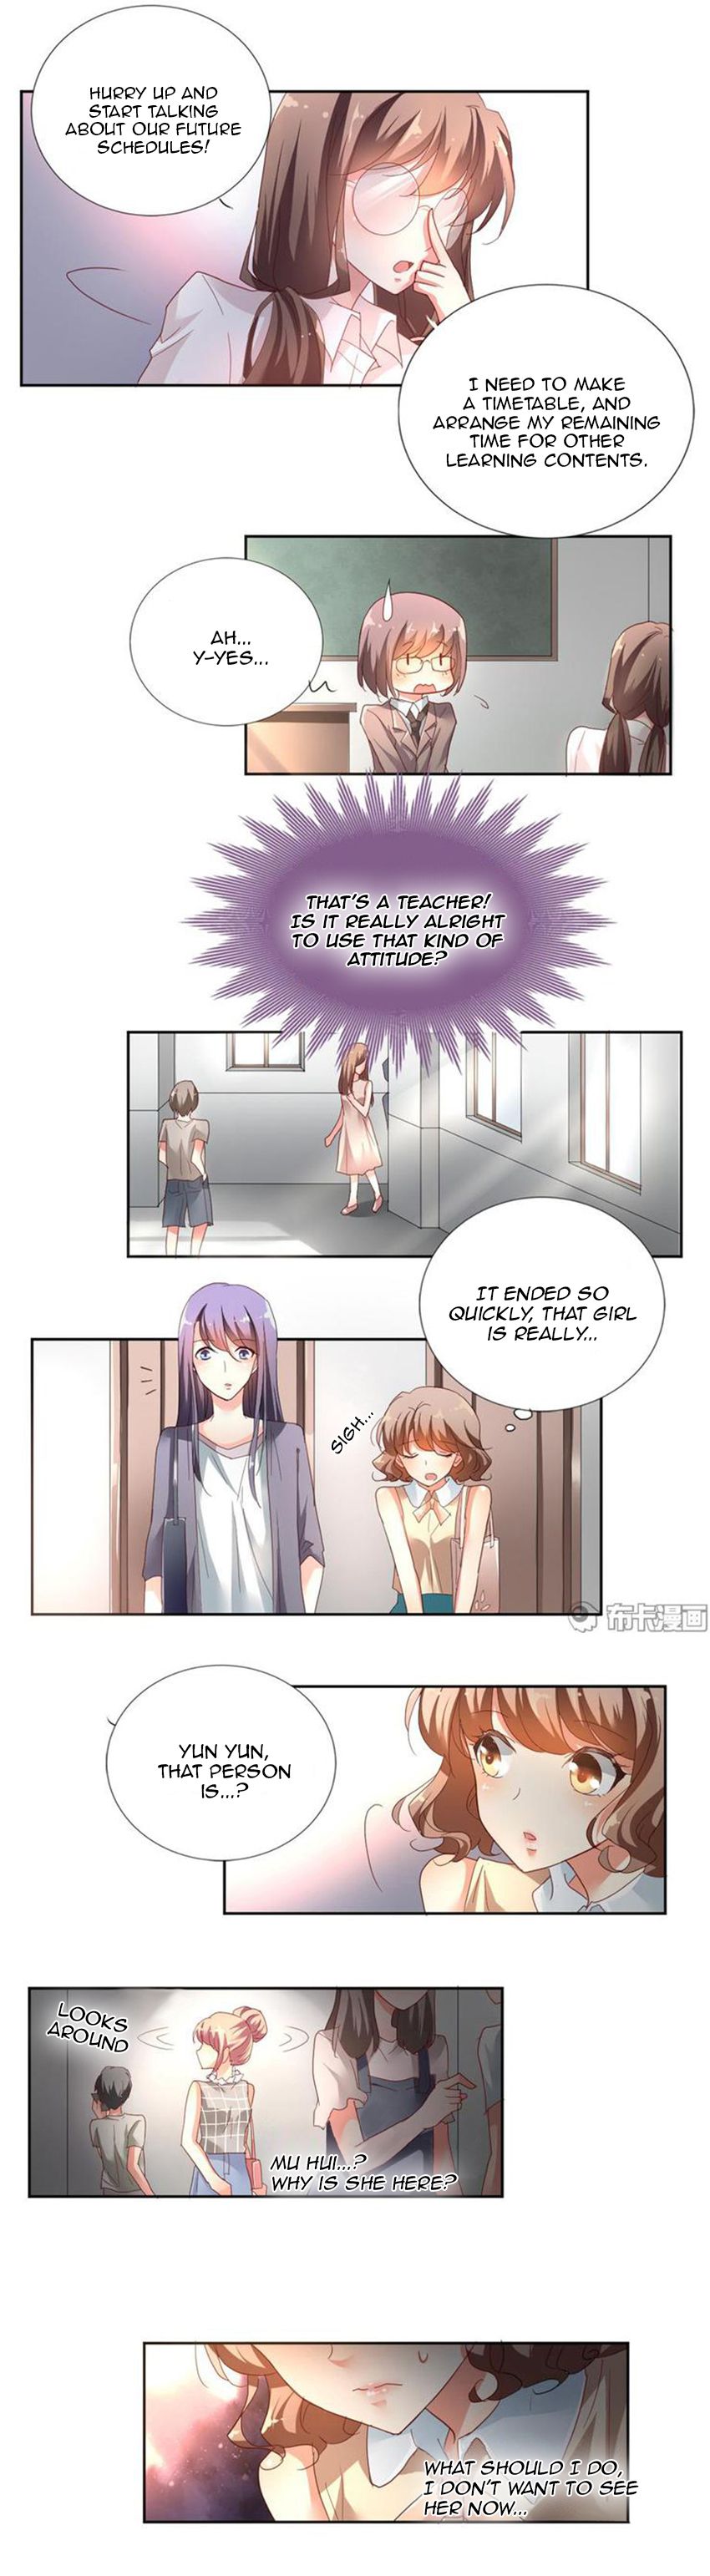 She Who is The Most Special to me - chapter 14 - #2